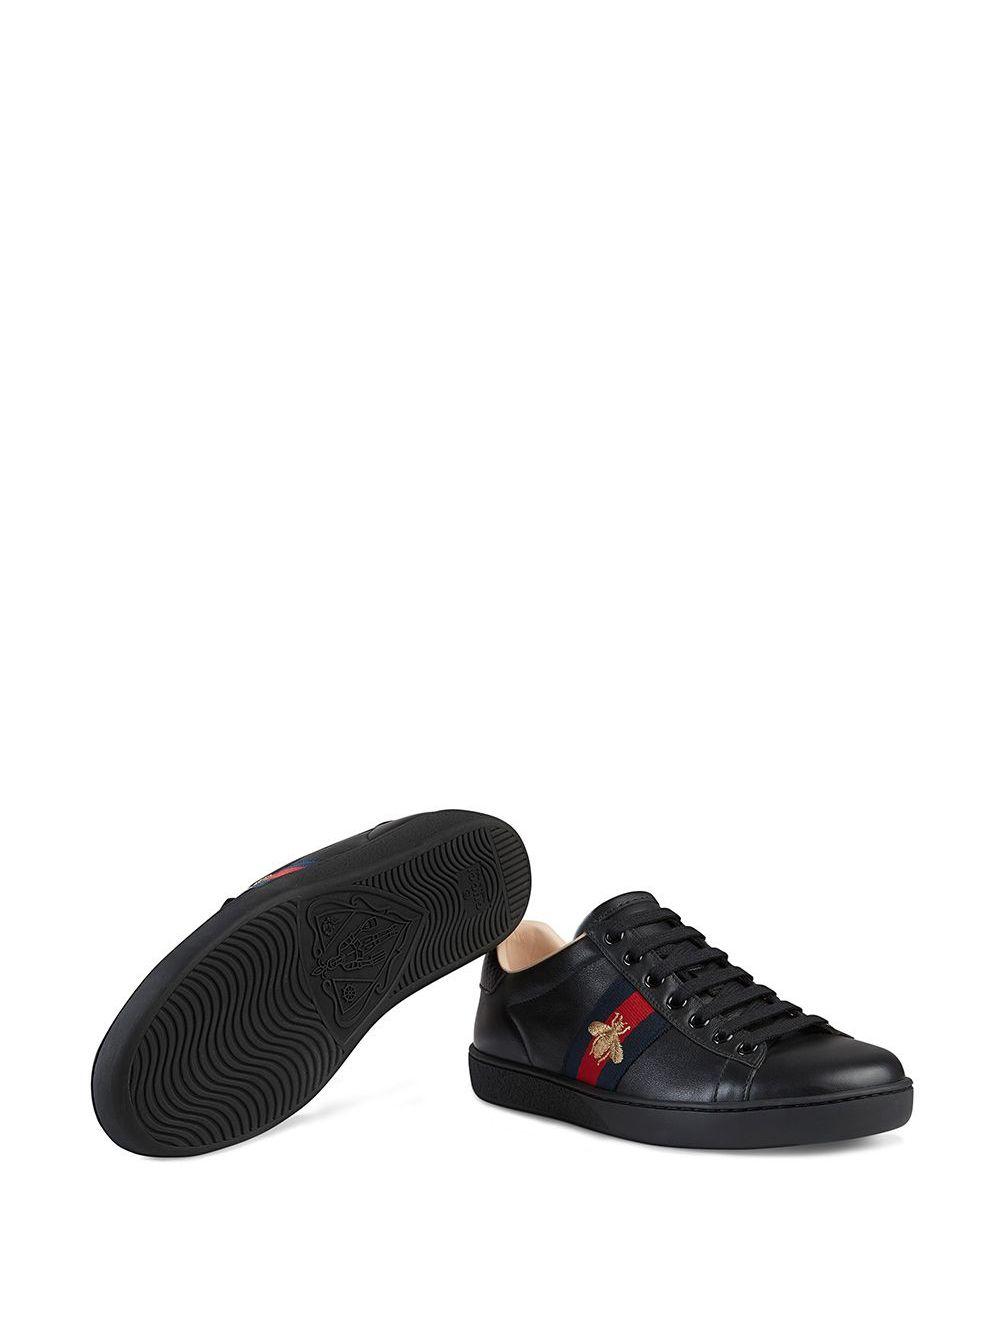 Gucci Leather Ace Embroidered Low-top Sneaker in Black for Men - Lyst